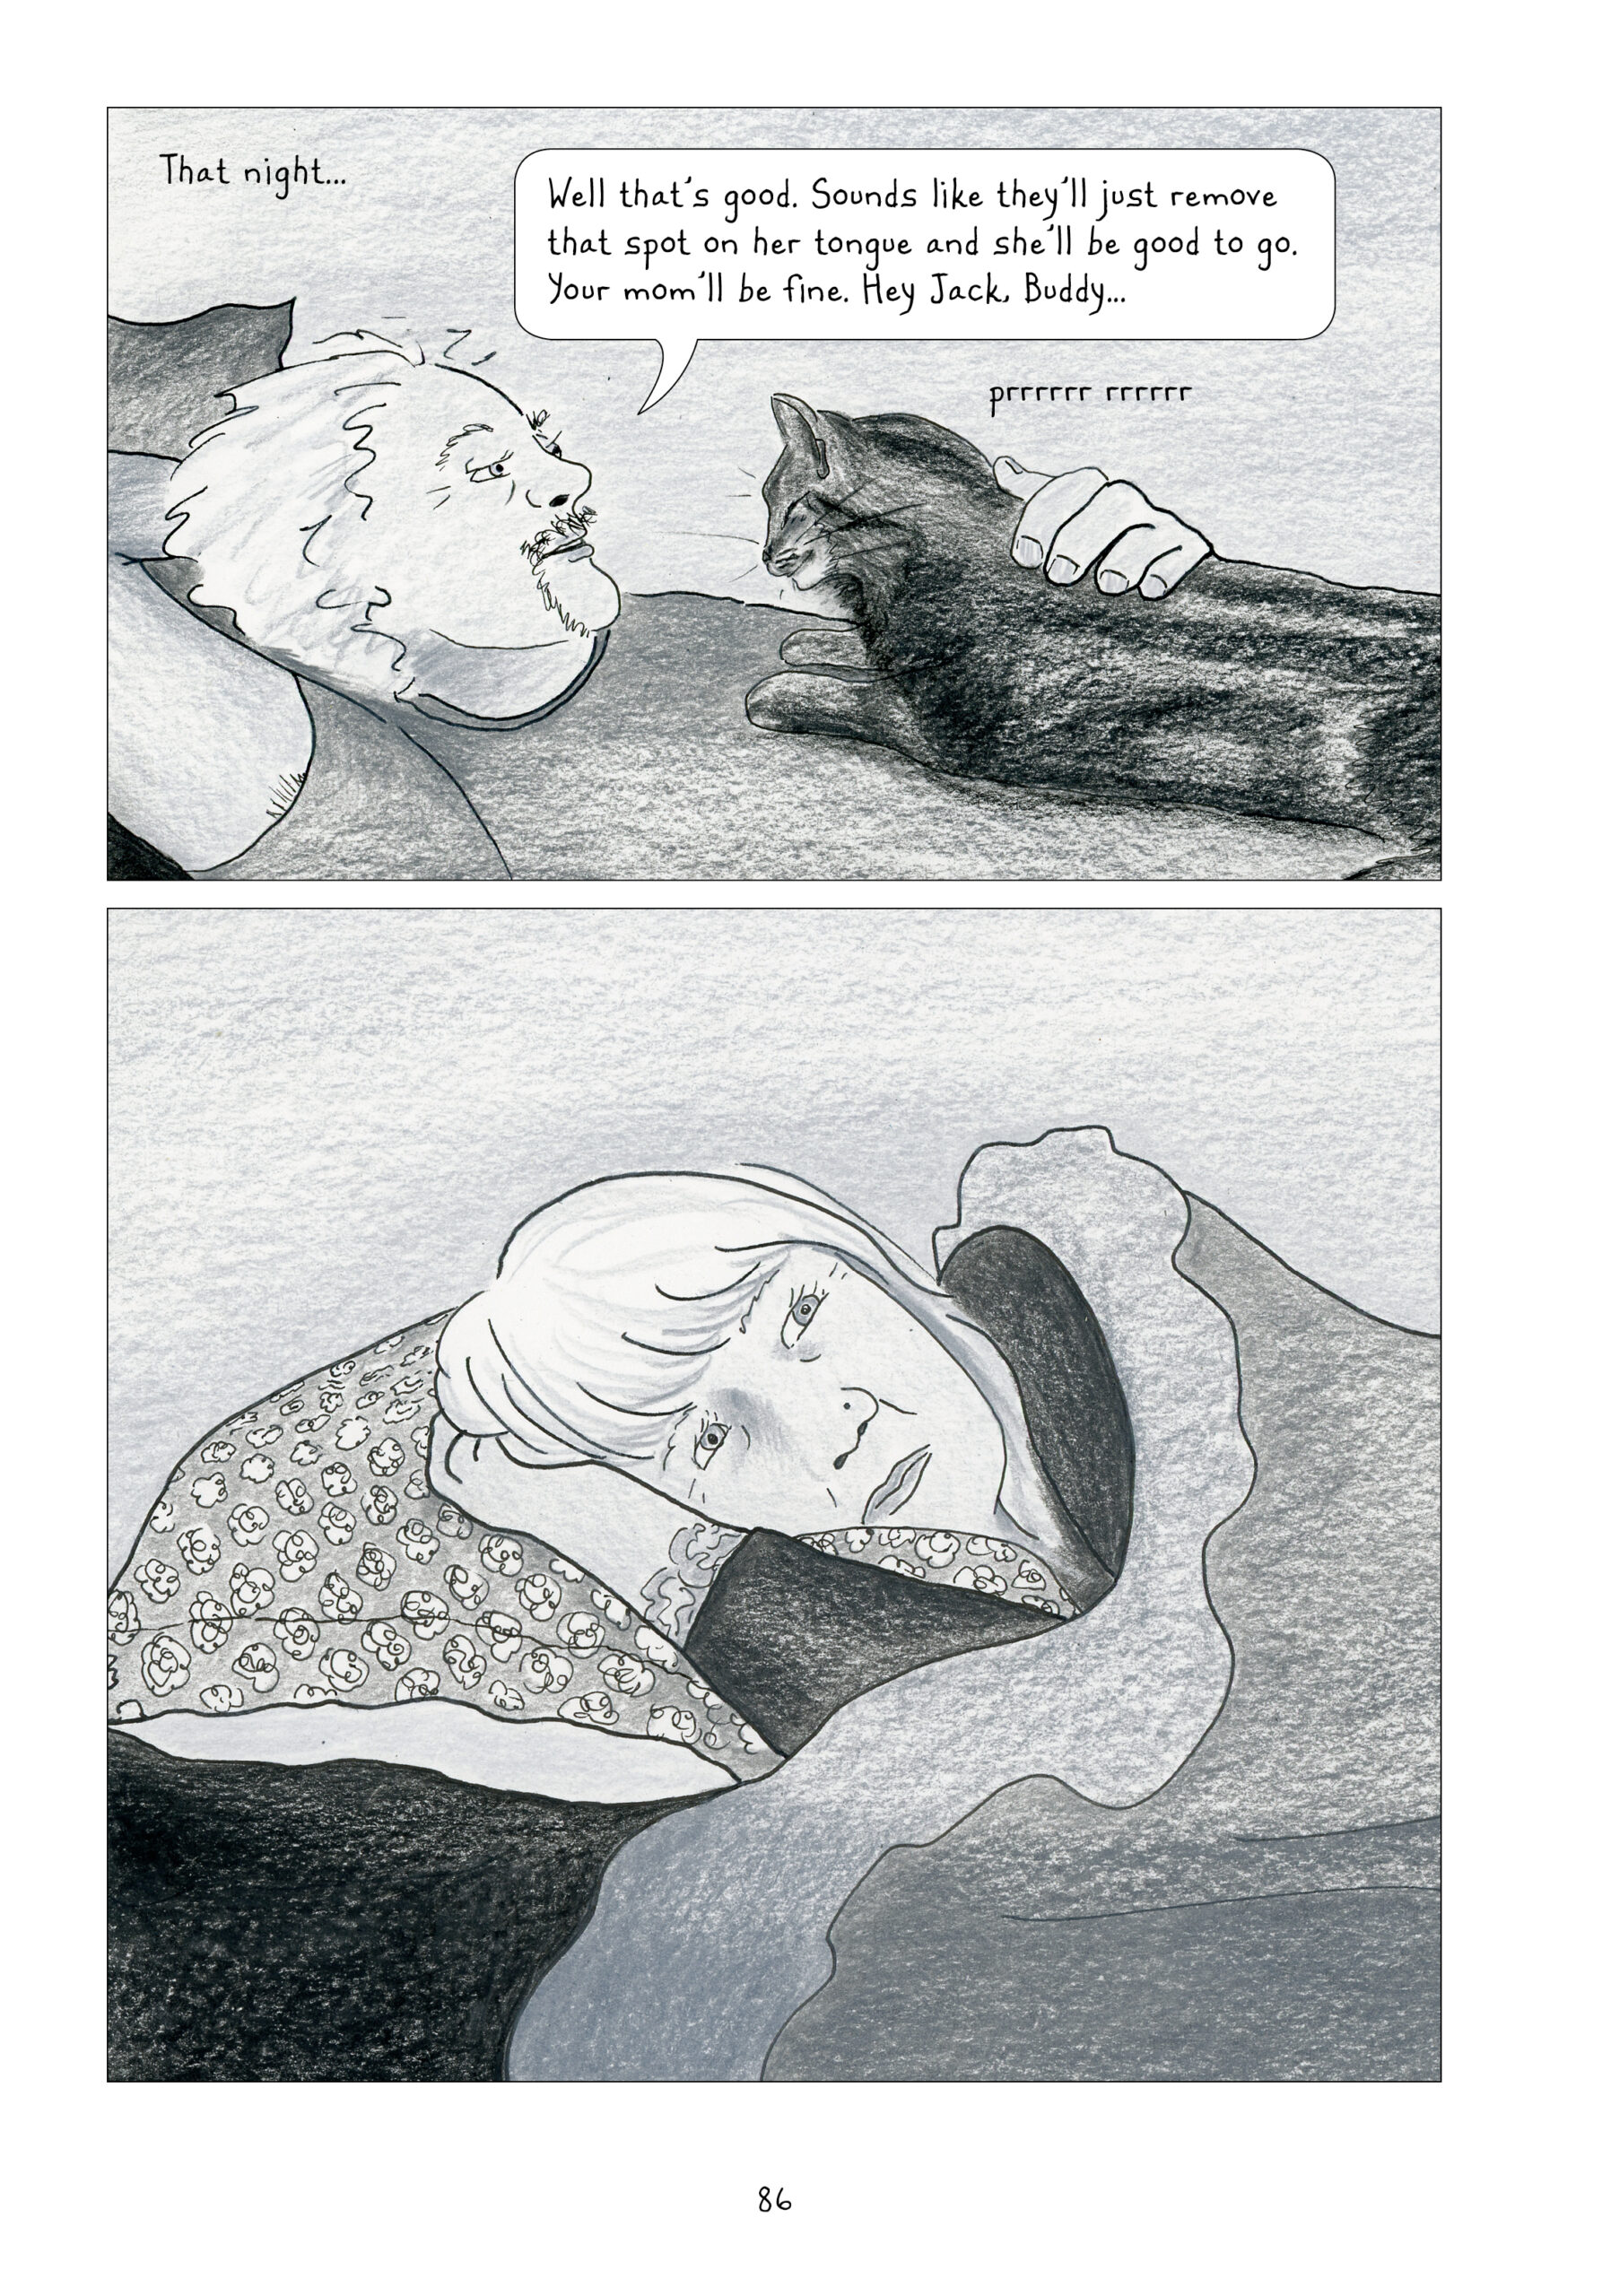 This page is split horizontally, with the top panel slightly shorter than the bottom. Both are colored in gray and white. The former starts with Lynnâ€™s narrationâ€”â€œThat nightâ€¦â€â€”and shows the man from the previous page lying on his back with a cat lying down on his chest and purring. He is hatless, revealing a full head of light, wavy hair, and he is wearing a short-sleeve shirt. His eyes are relaxed and his lips are slightly parted as he says, â€œWell thatâ€™s good. Sounds like theyâ€™ll just remove the spot on her tongue and sheâ€™ll be good to go. Your momâ€™ll be fine. Hey Jack, buddyâ€¦â€ In the next panel, Lynn is lying on her side, facing the reader but pensively looking away up towards her left. Her hand is sandwiched between her head and her pillow, and her blanket is pulled up to her shoulder.